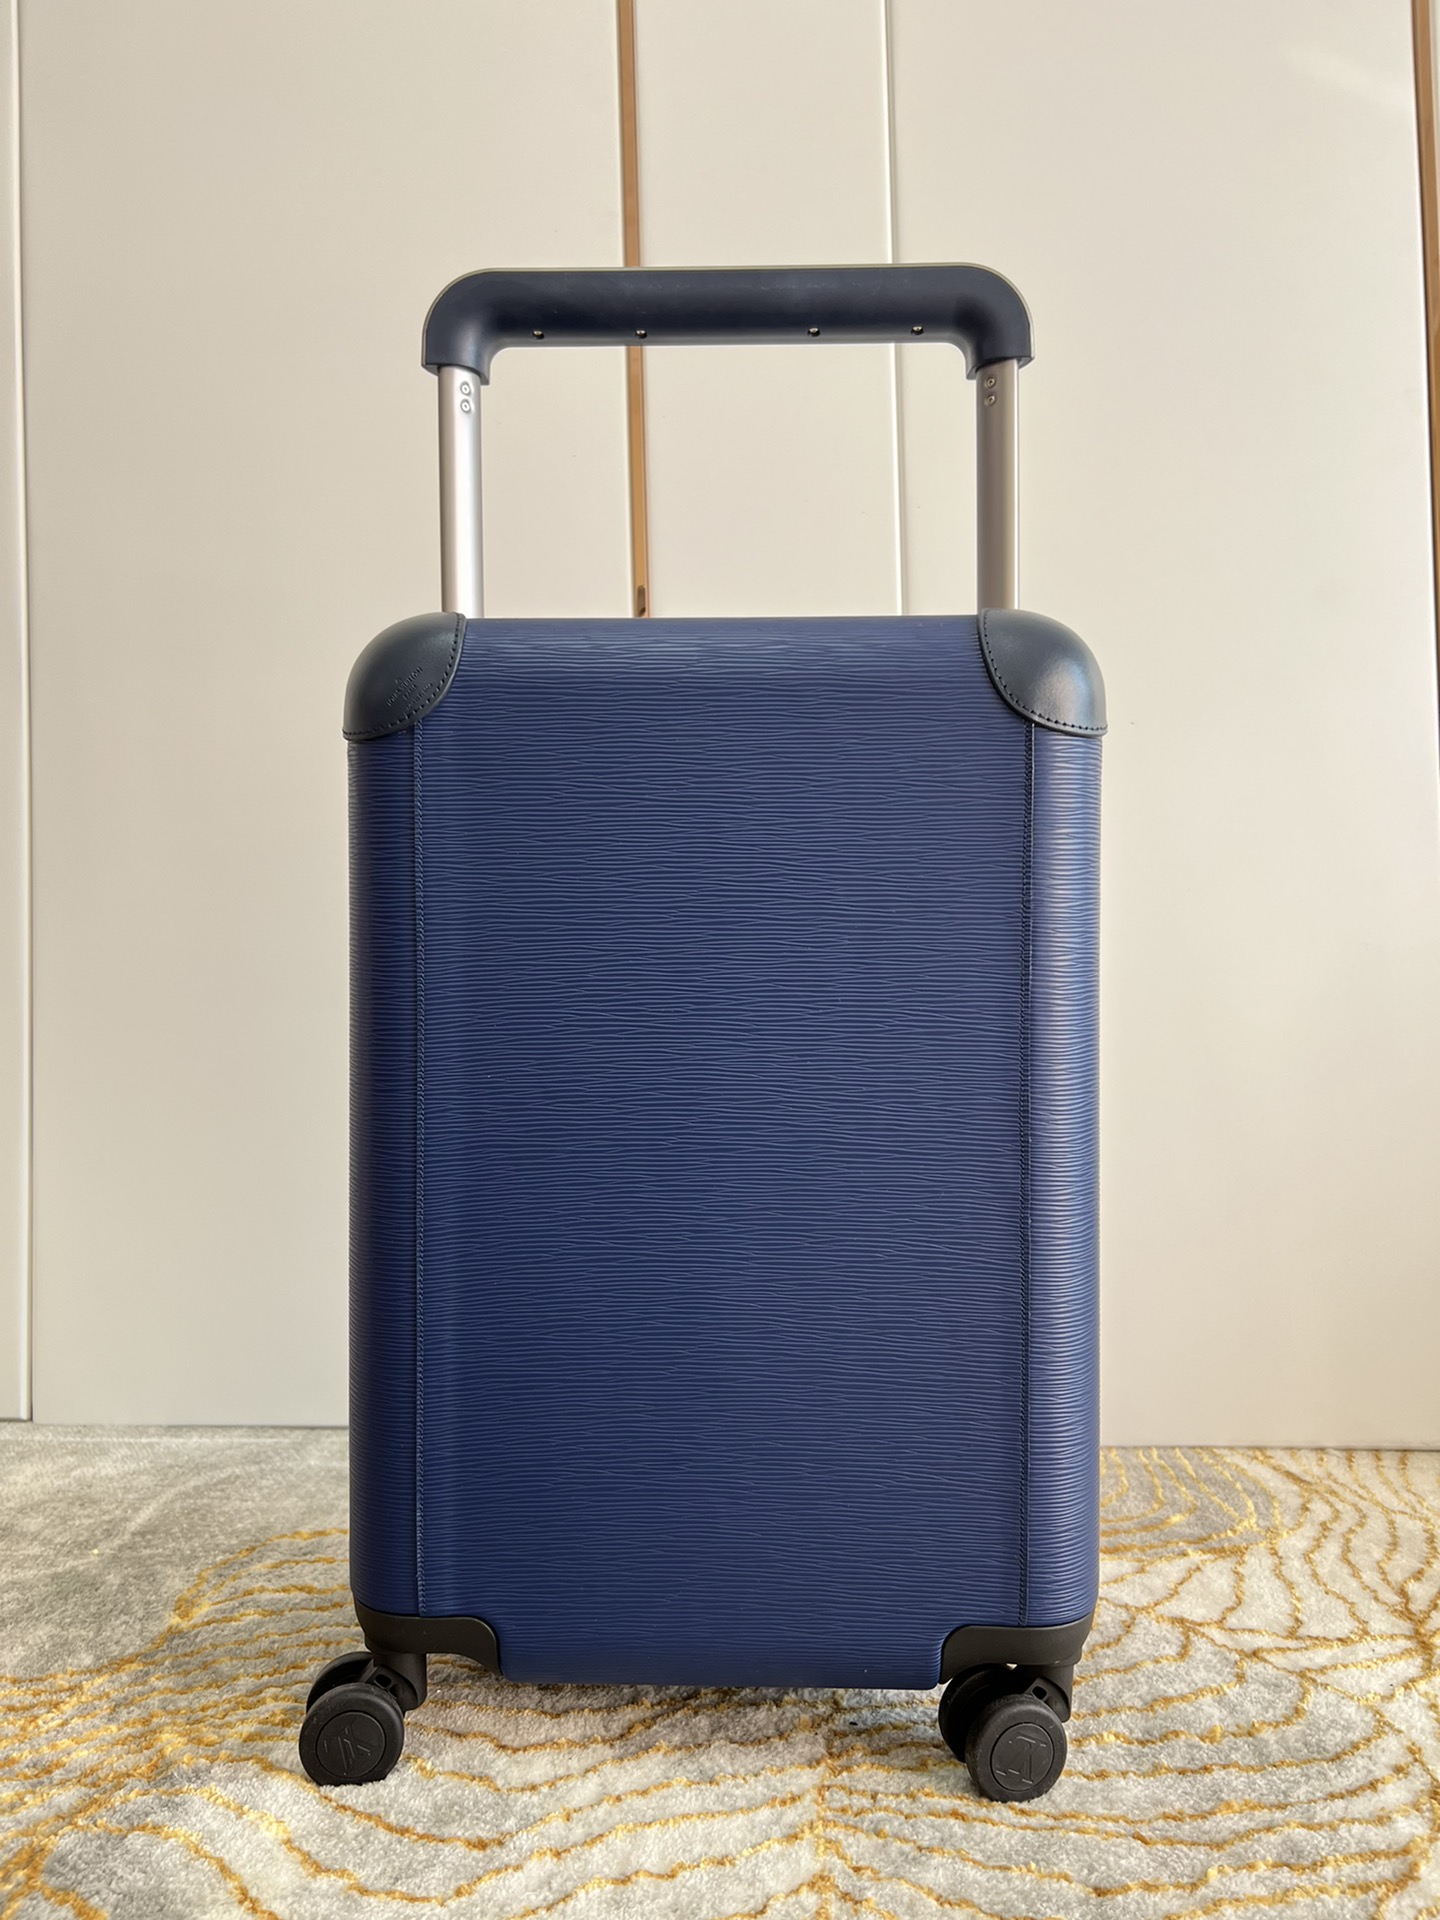 Louis Vuitton Bags Trolley Case Knockoff Highest Quality
 Blue Epi Canvas